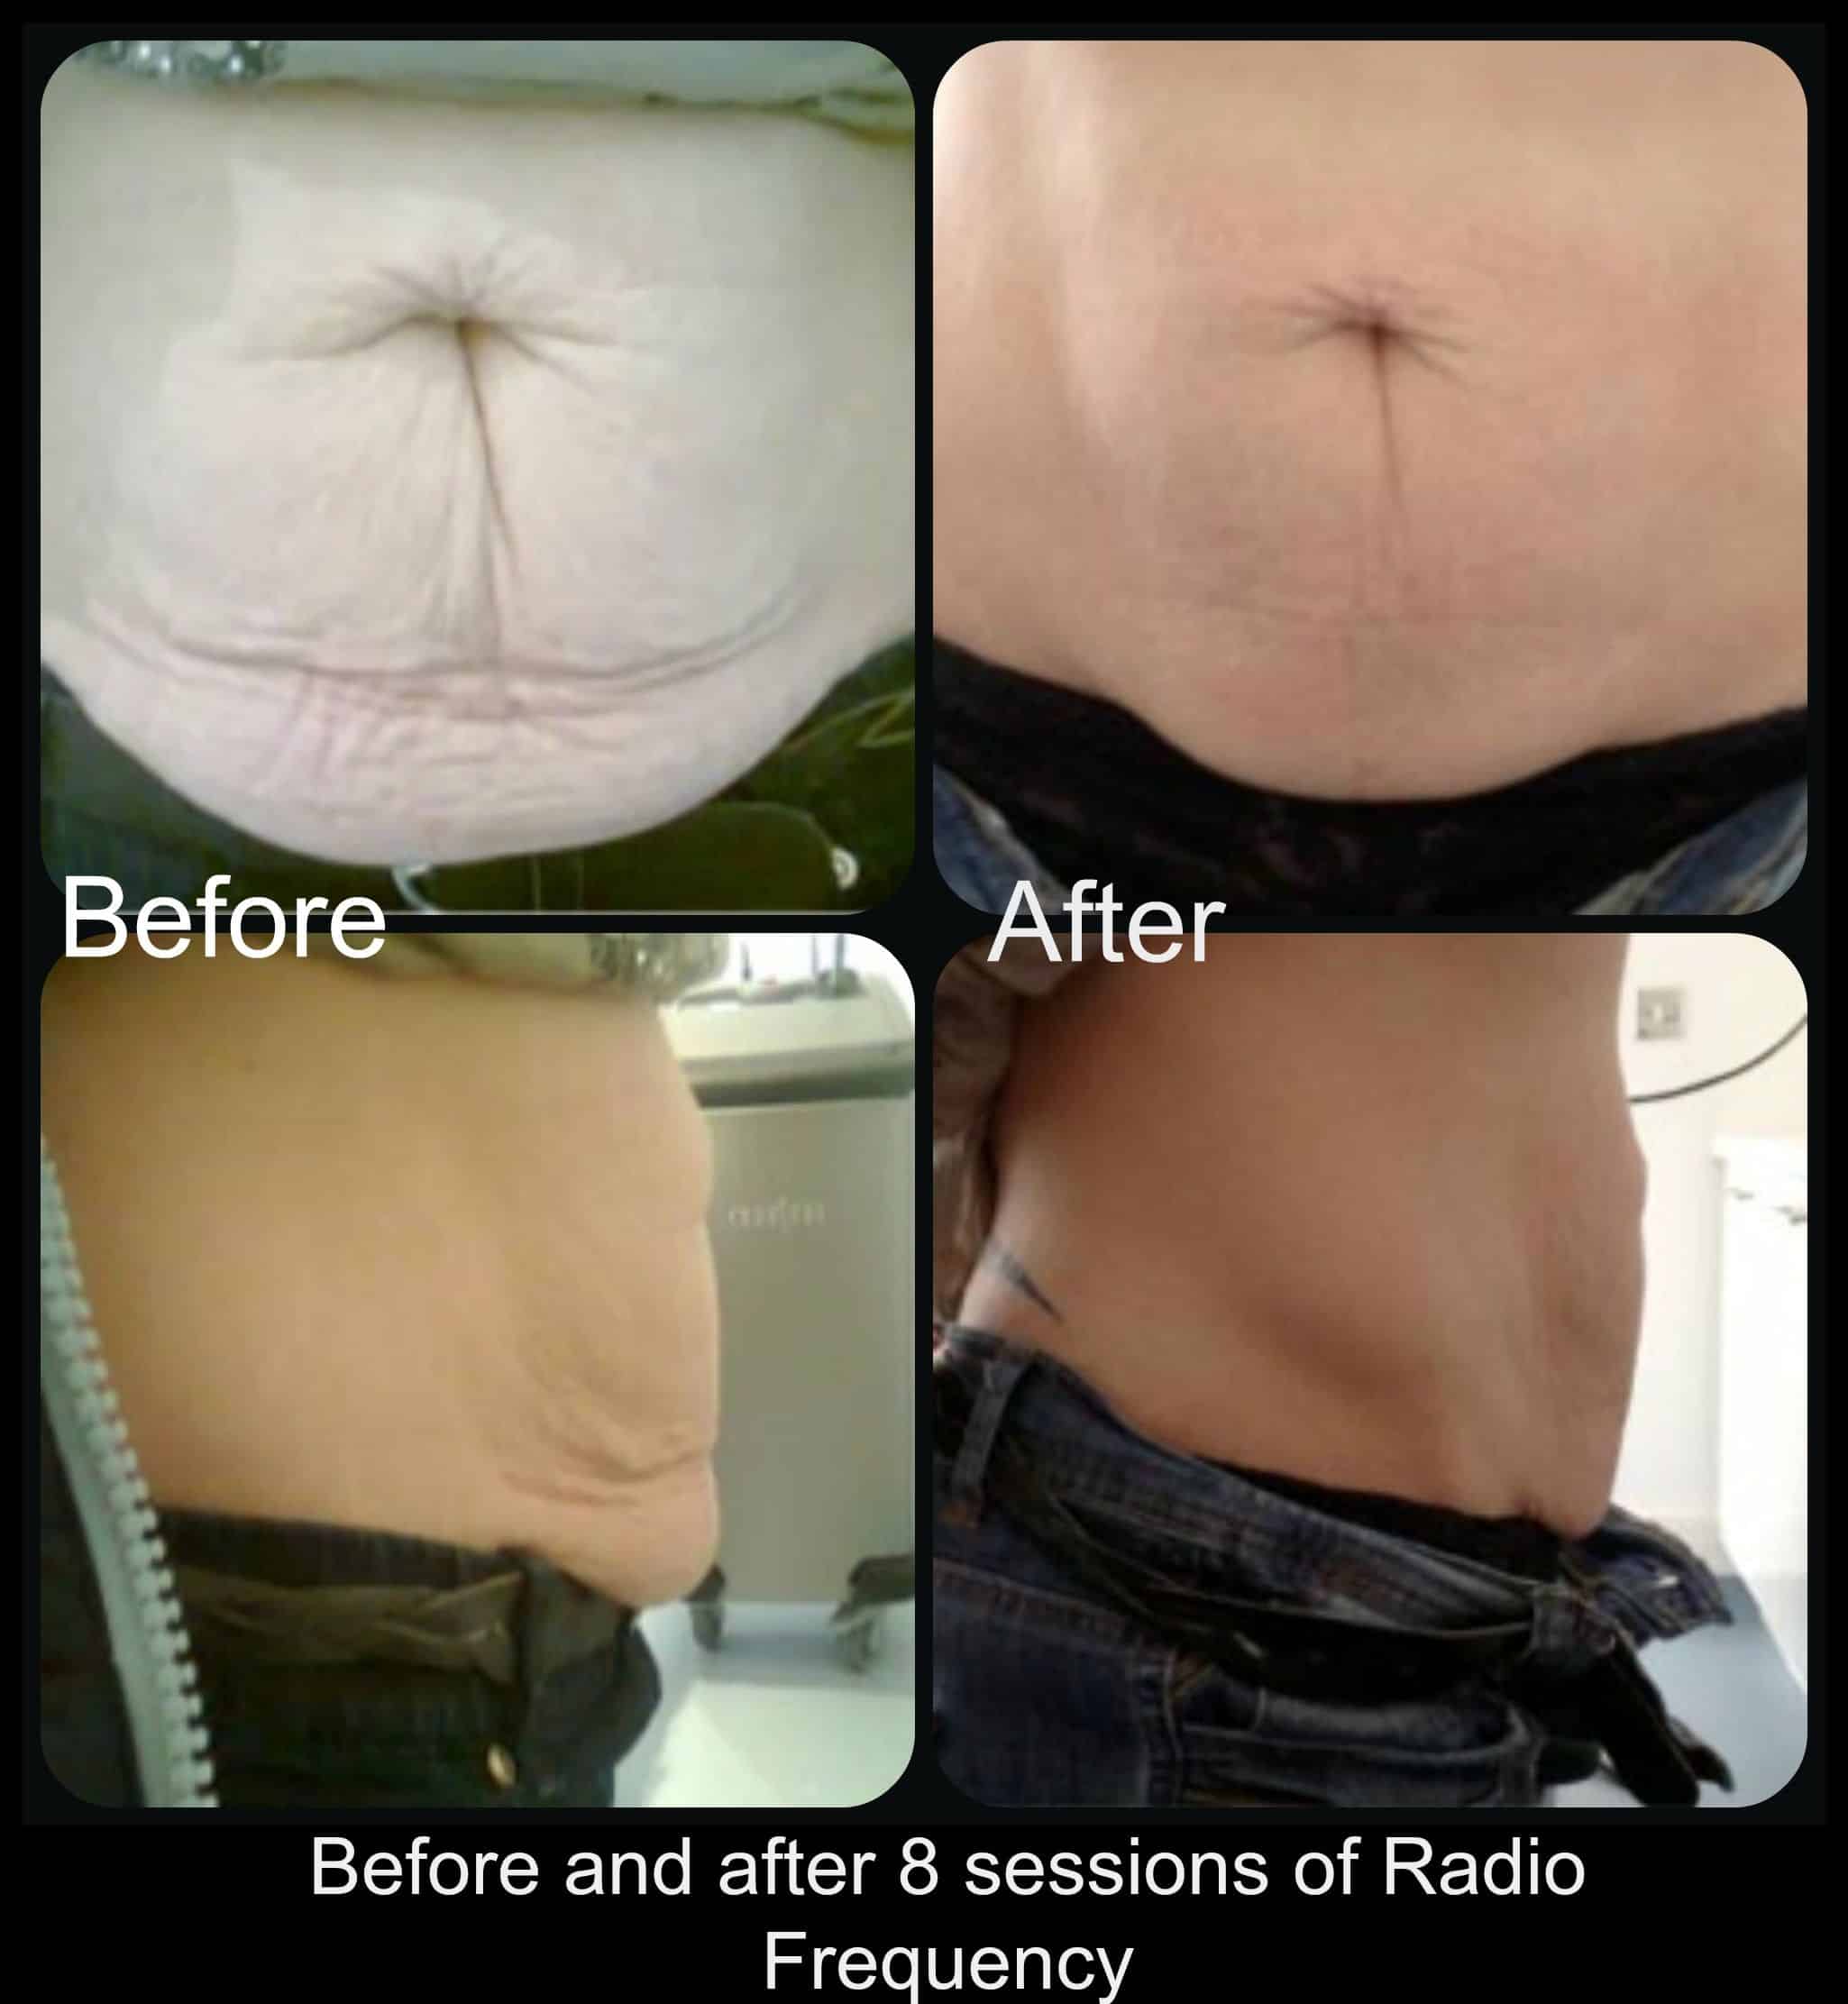 Before and after 8 sessions of Radio Frequency